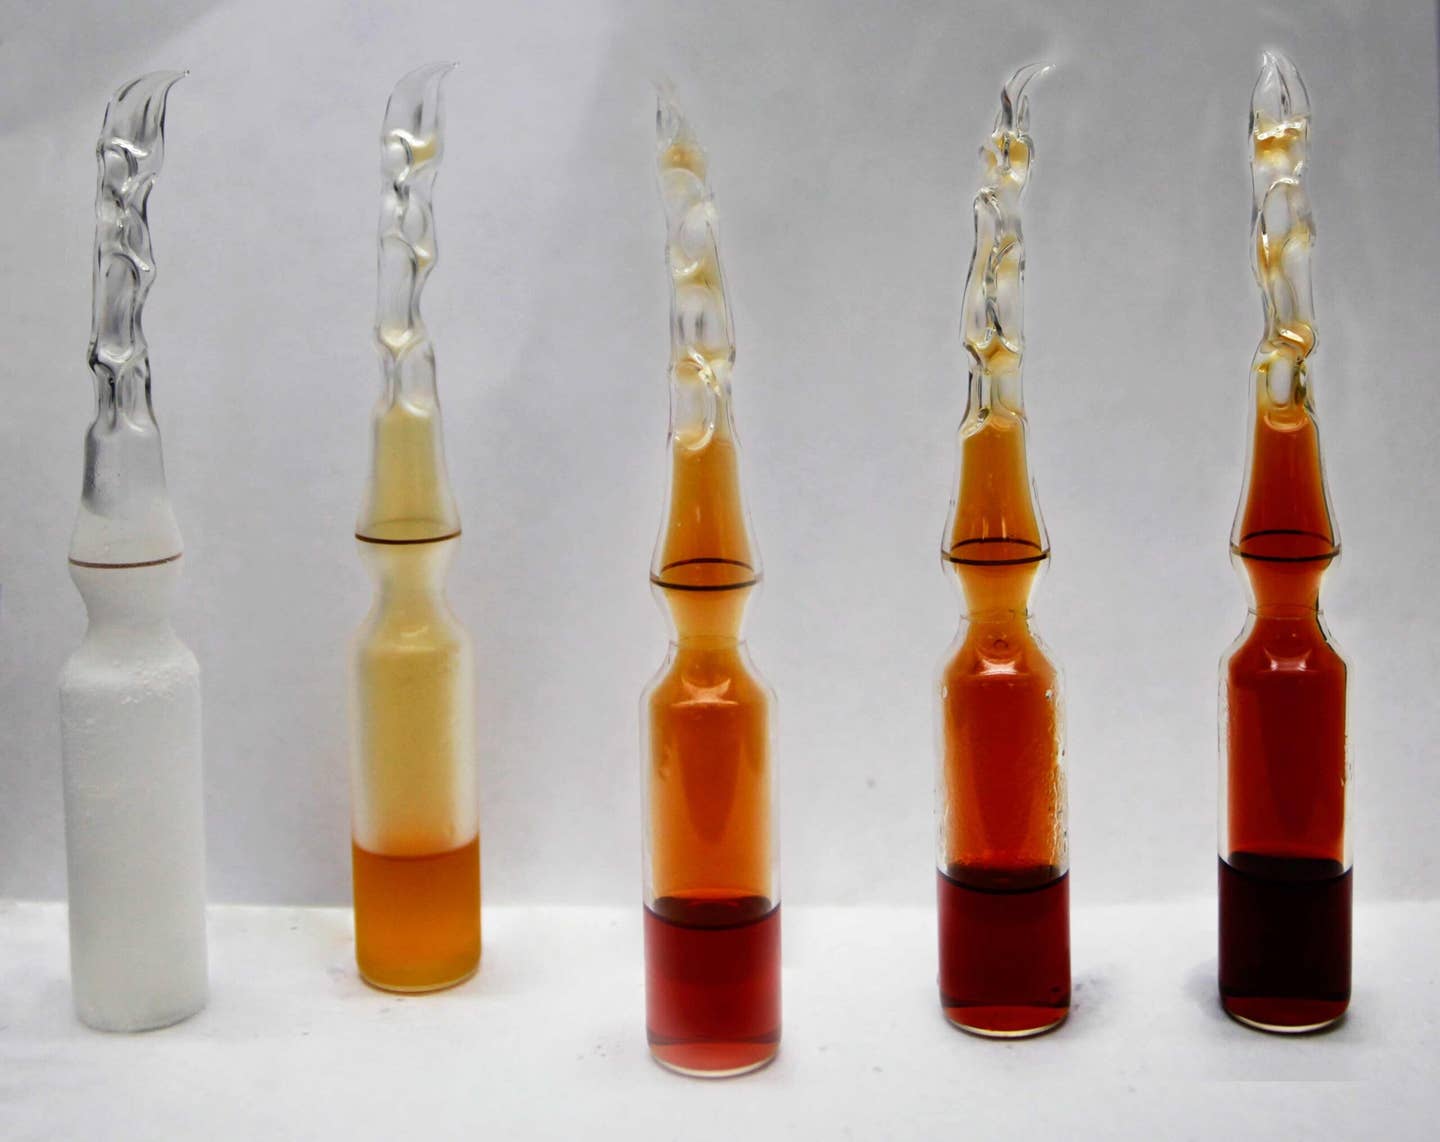 An overlay of the same 99.9% pure NO2/N2O4 sealed in an ampoule. From left to right -196 °C, 0 °C, 23 °C, 35 °C, 50 °C. <em>Efram Goldberg, Florida Institute of Technology, Dr. Knight Research Group via Wikimedia Commons</em>